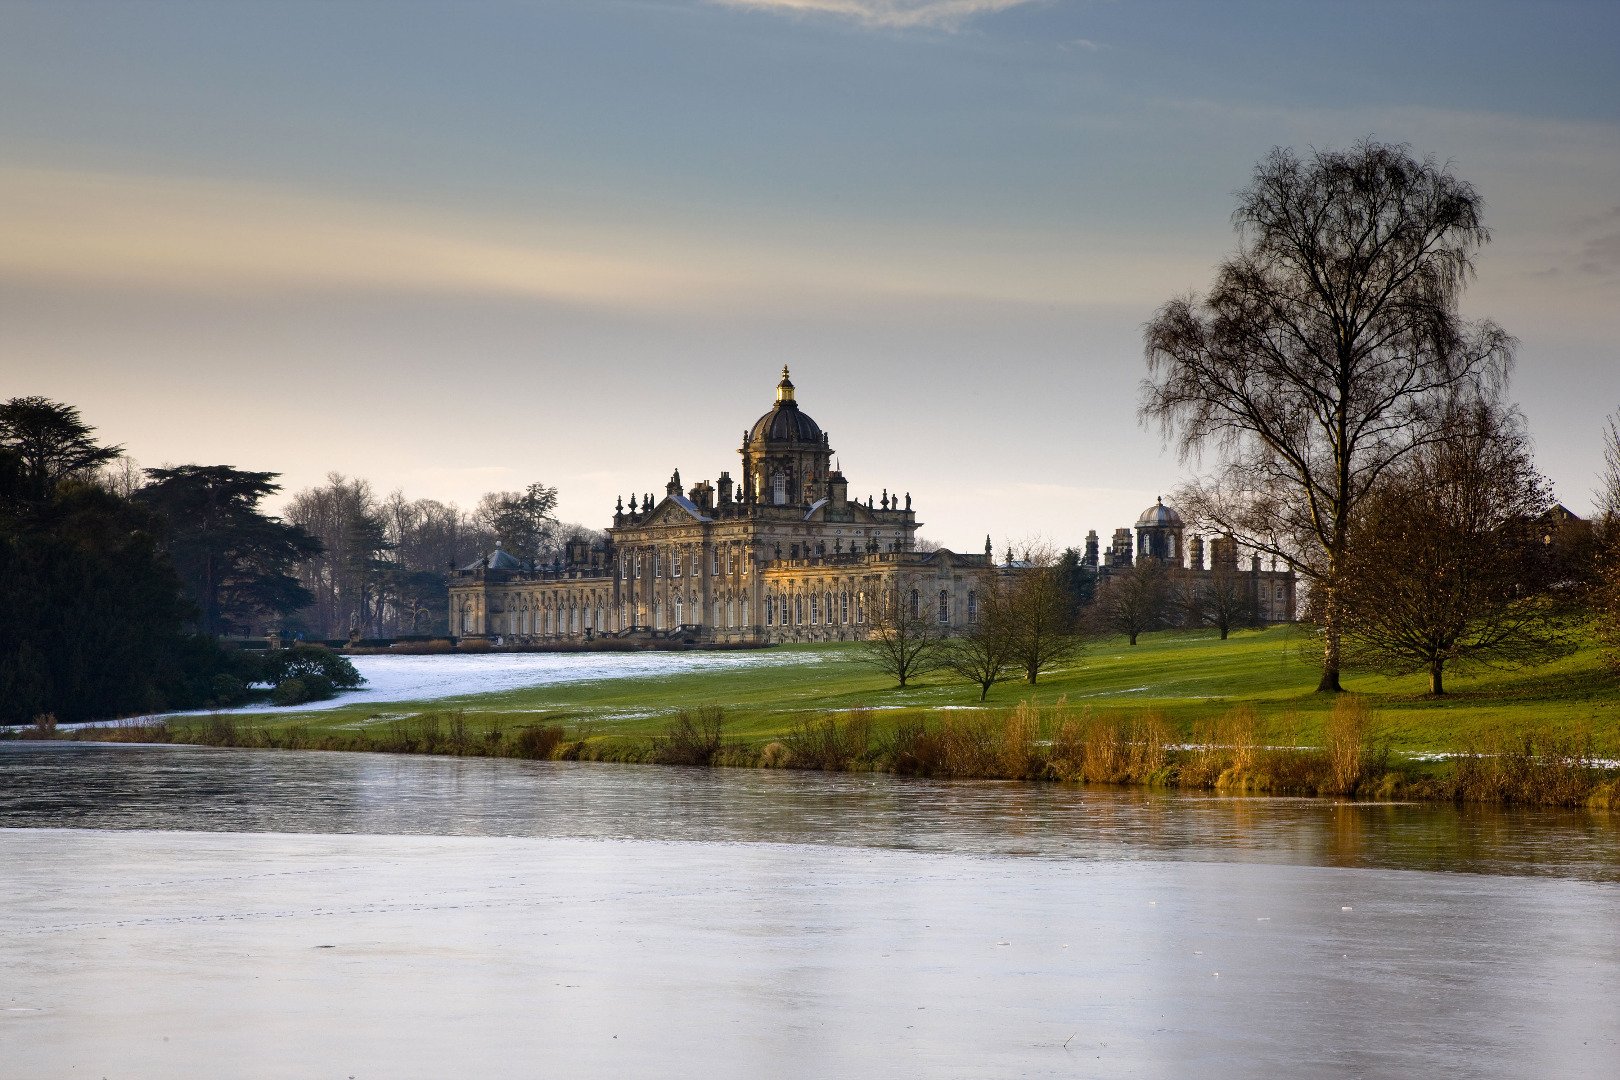 Image name castle howard and south lake mike kipling the 24 image from the post Yorkshire Stately Homes and Gardens in Yorkshire.com.